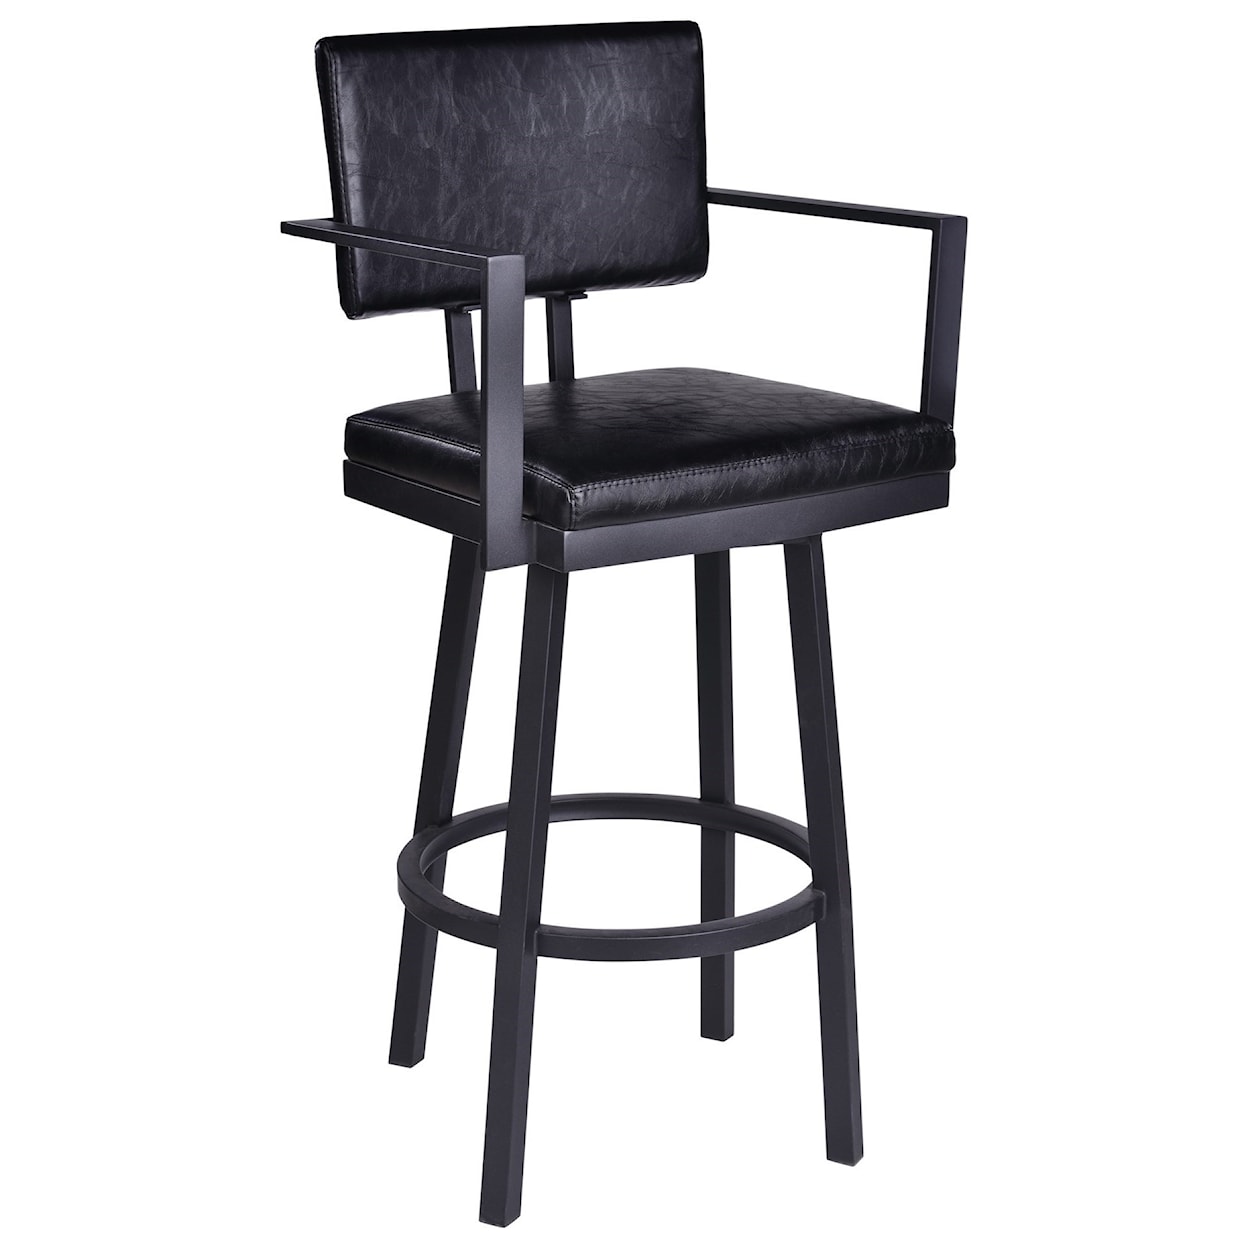 Armen Living Balboa 26” Counter Height Barstool with Arms